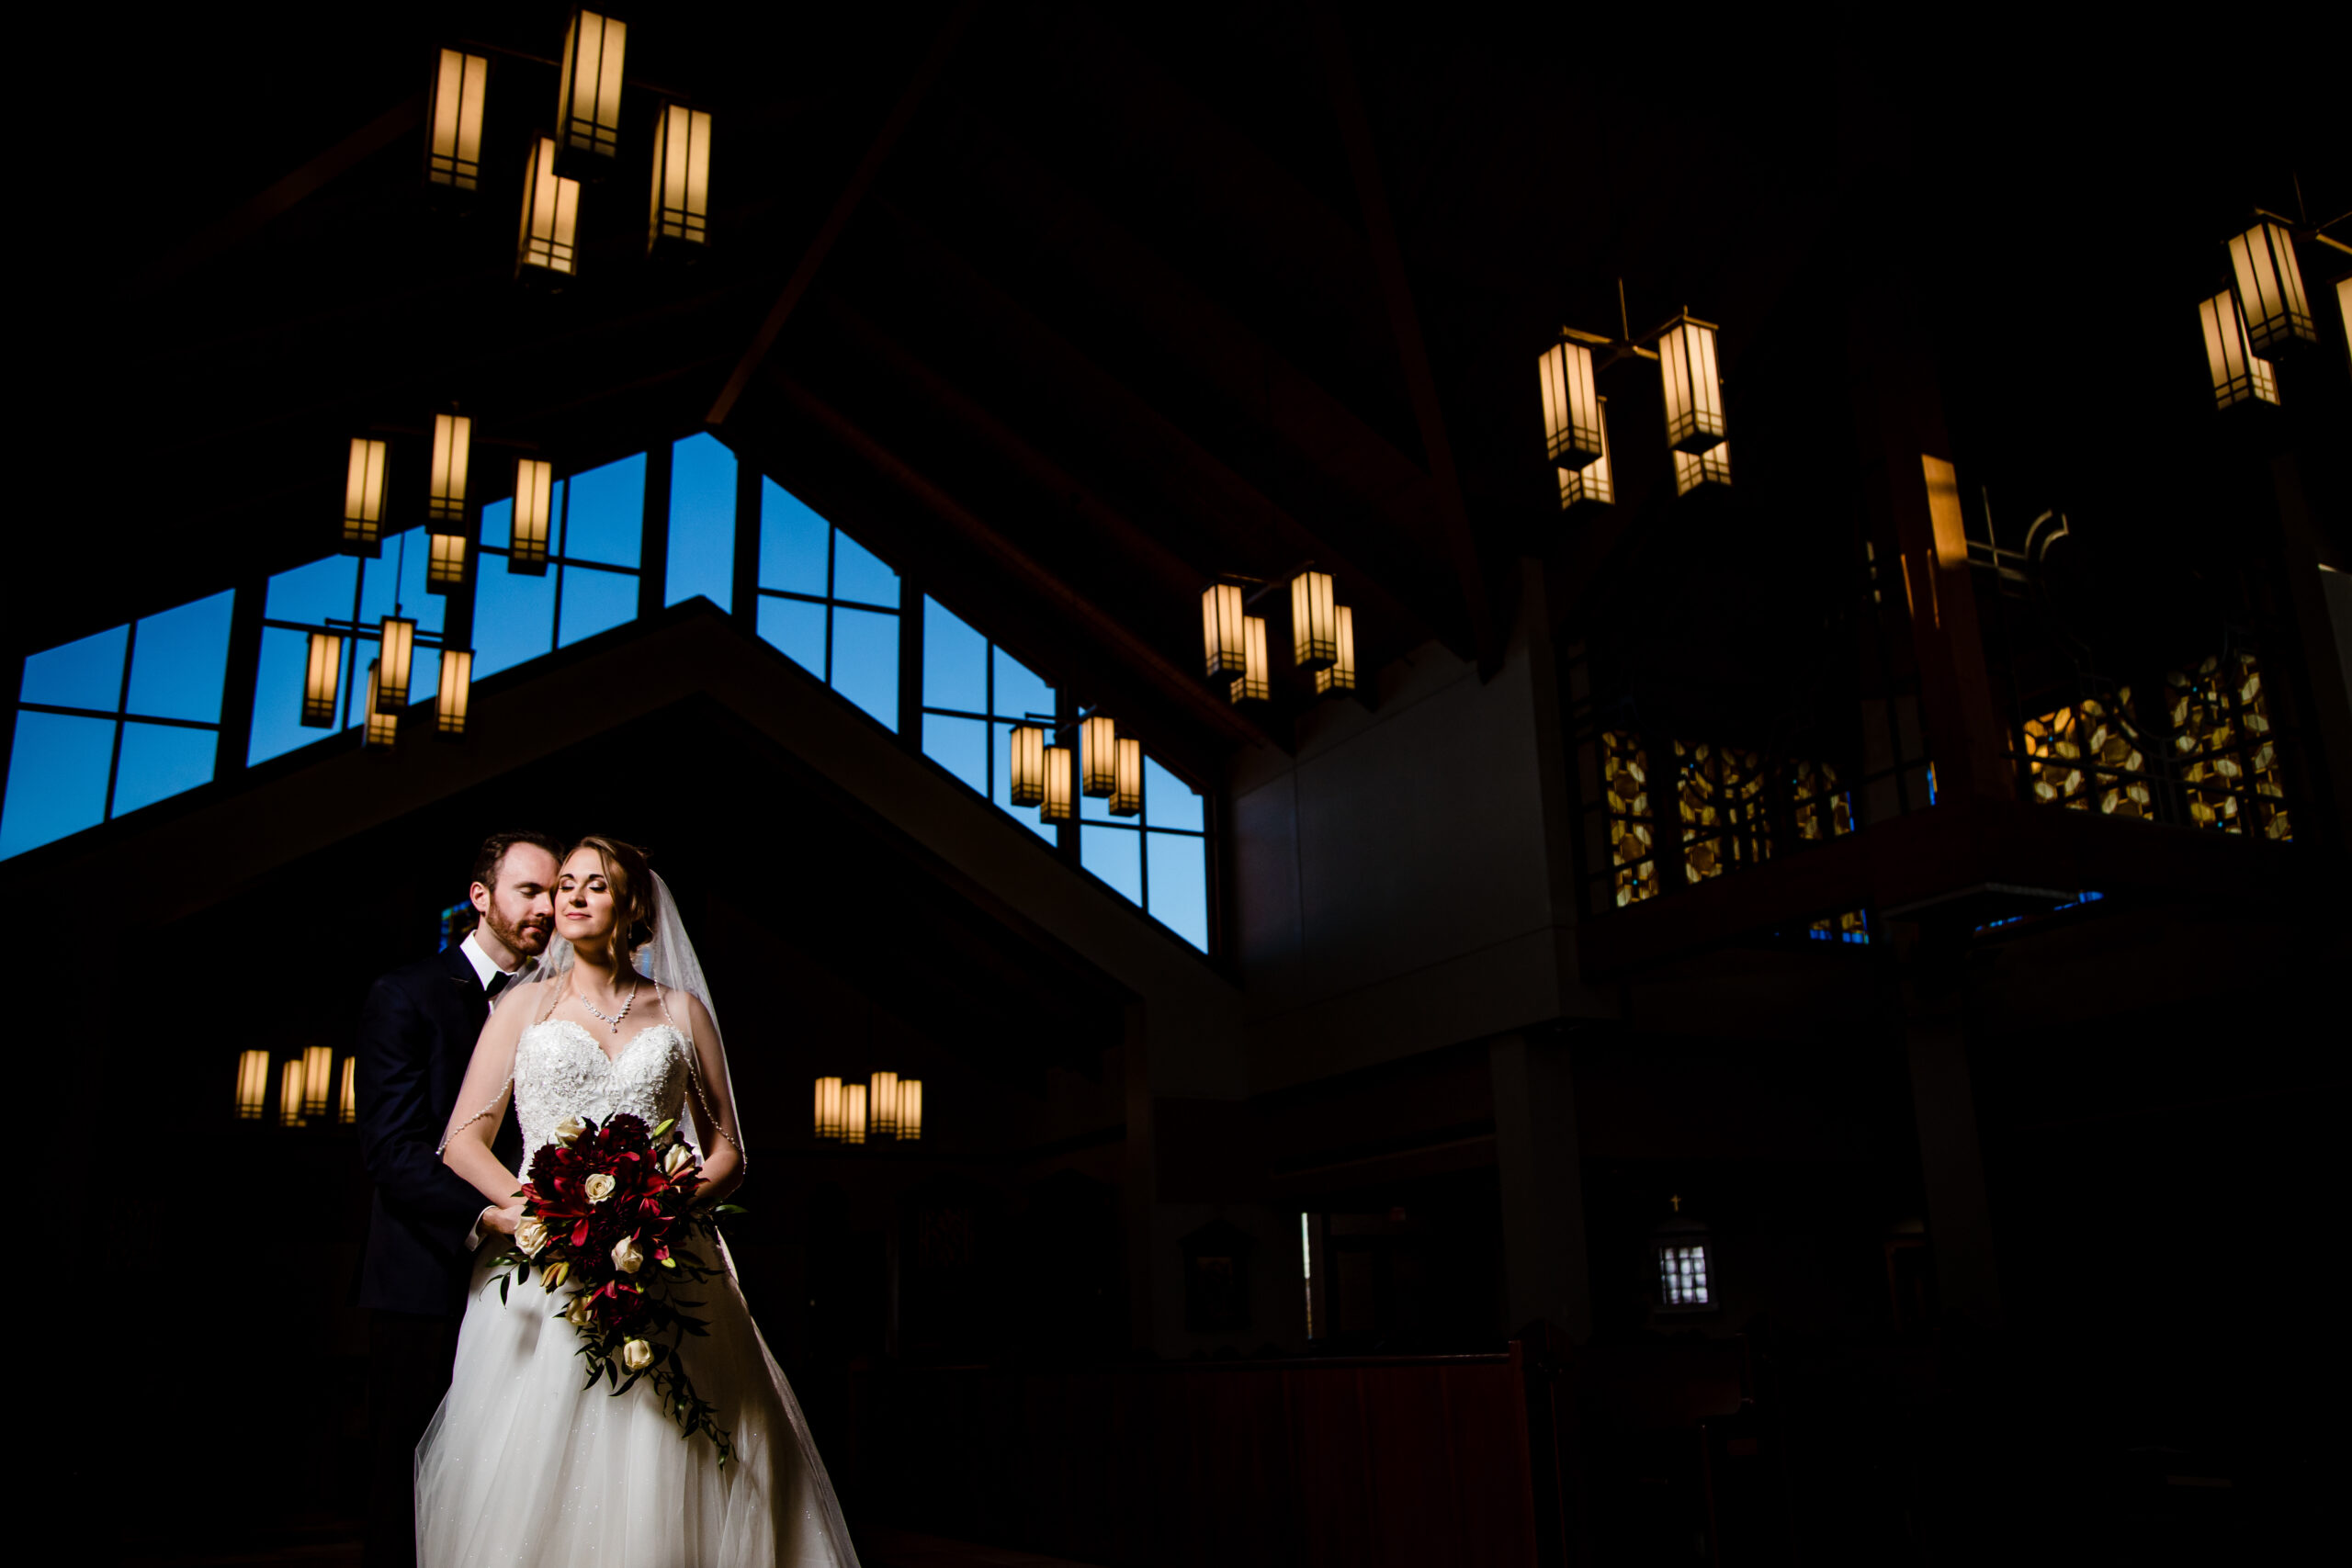 A bride and groom, captured by New Jersey Wedding Photographer Jarot Bocanegra, standing in a church at night.